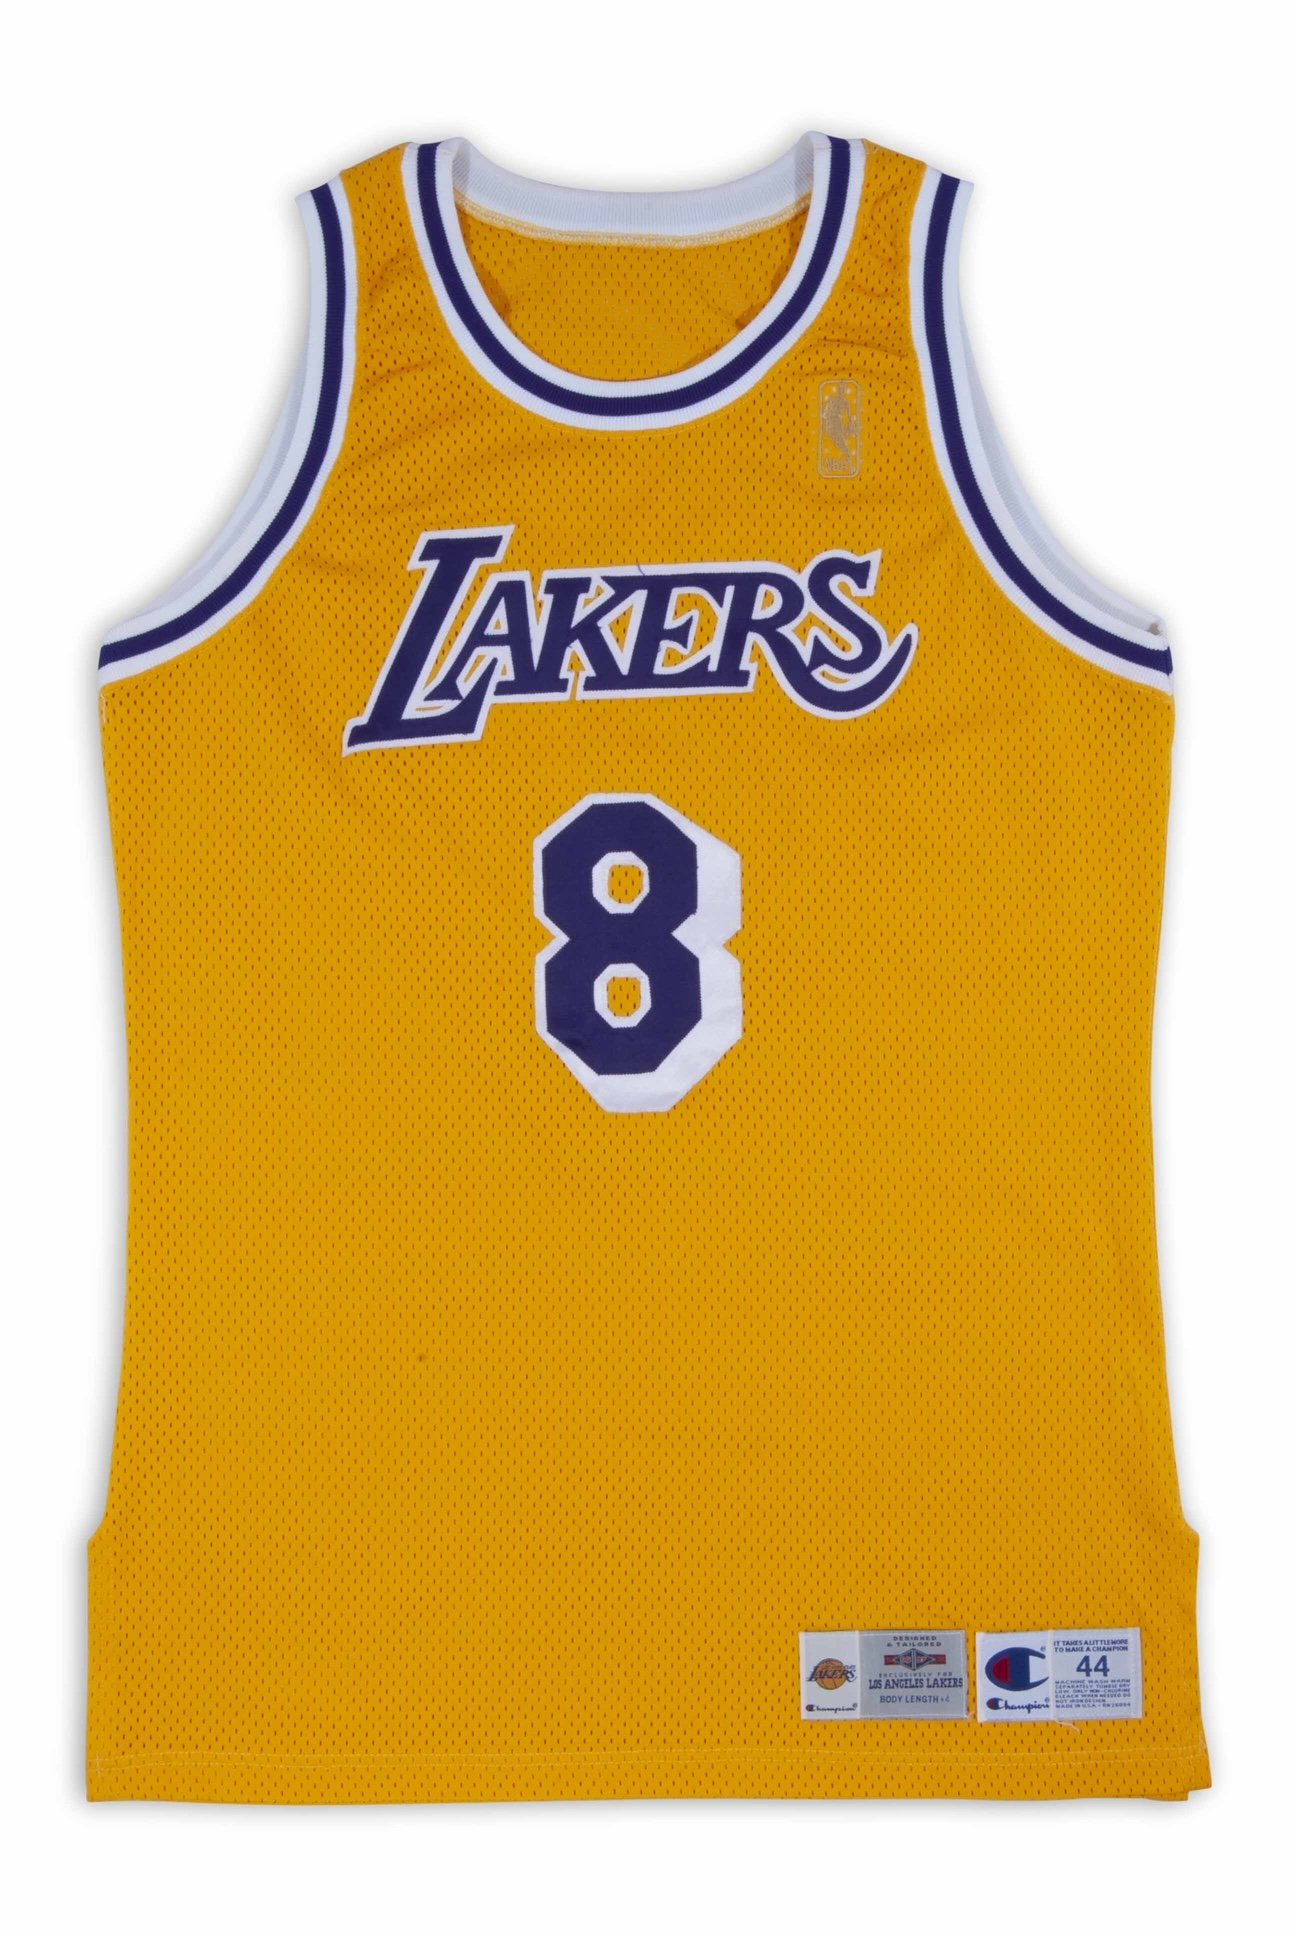 Kobe Bryant Rookie Playoff Jersey Revealed; Could Bring $3M-$5M